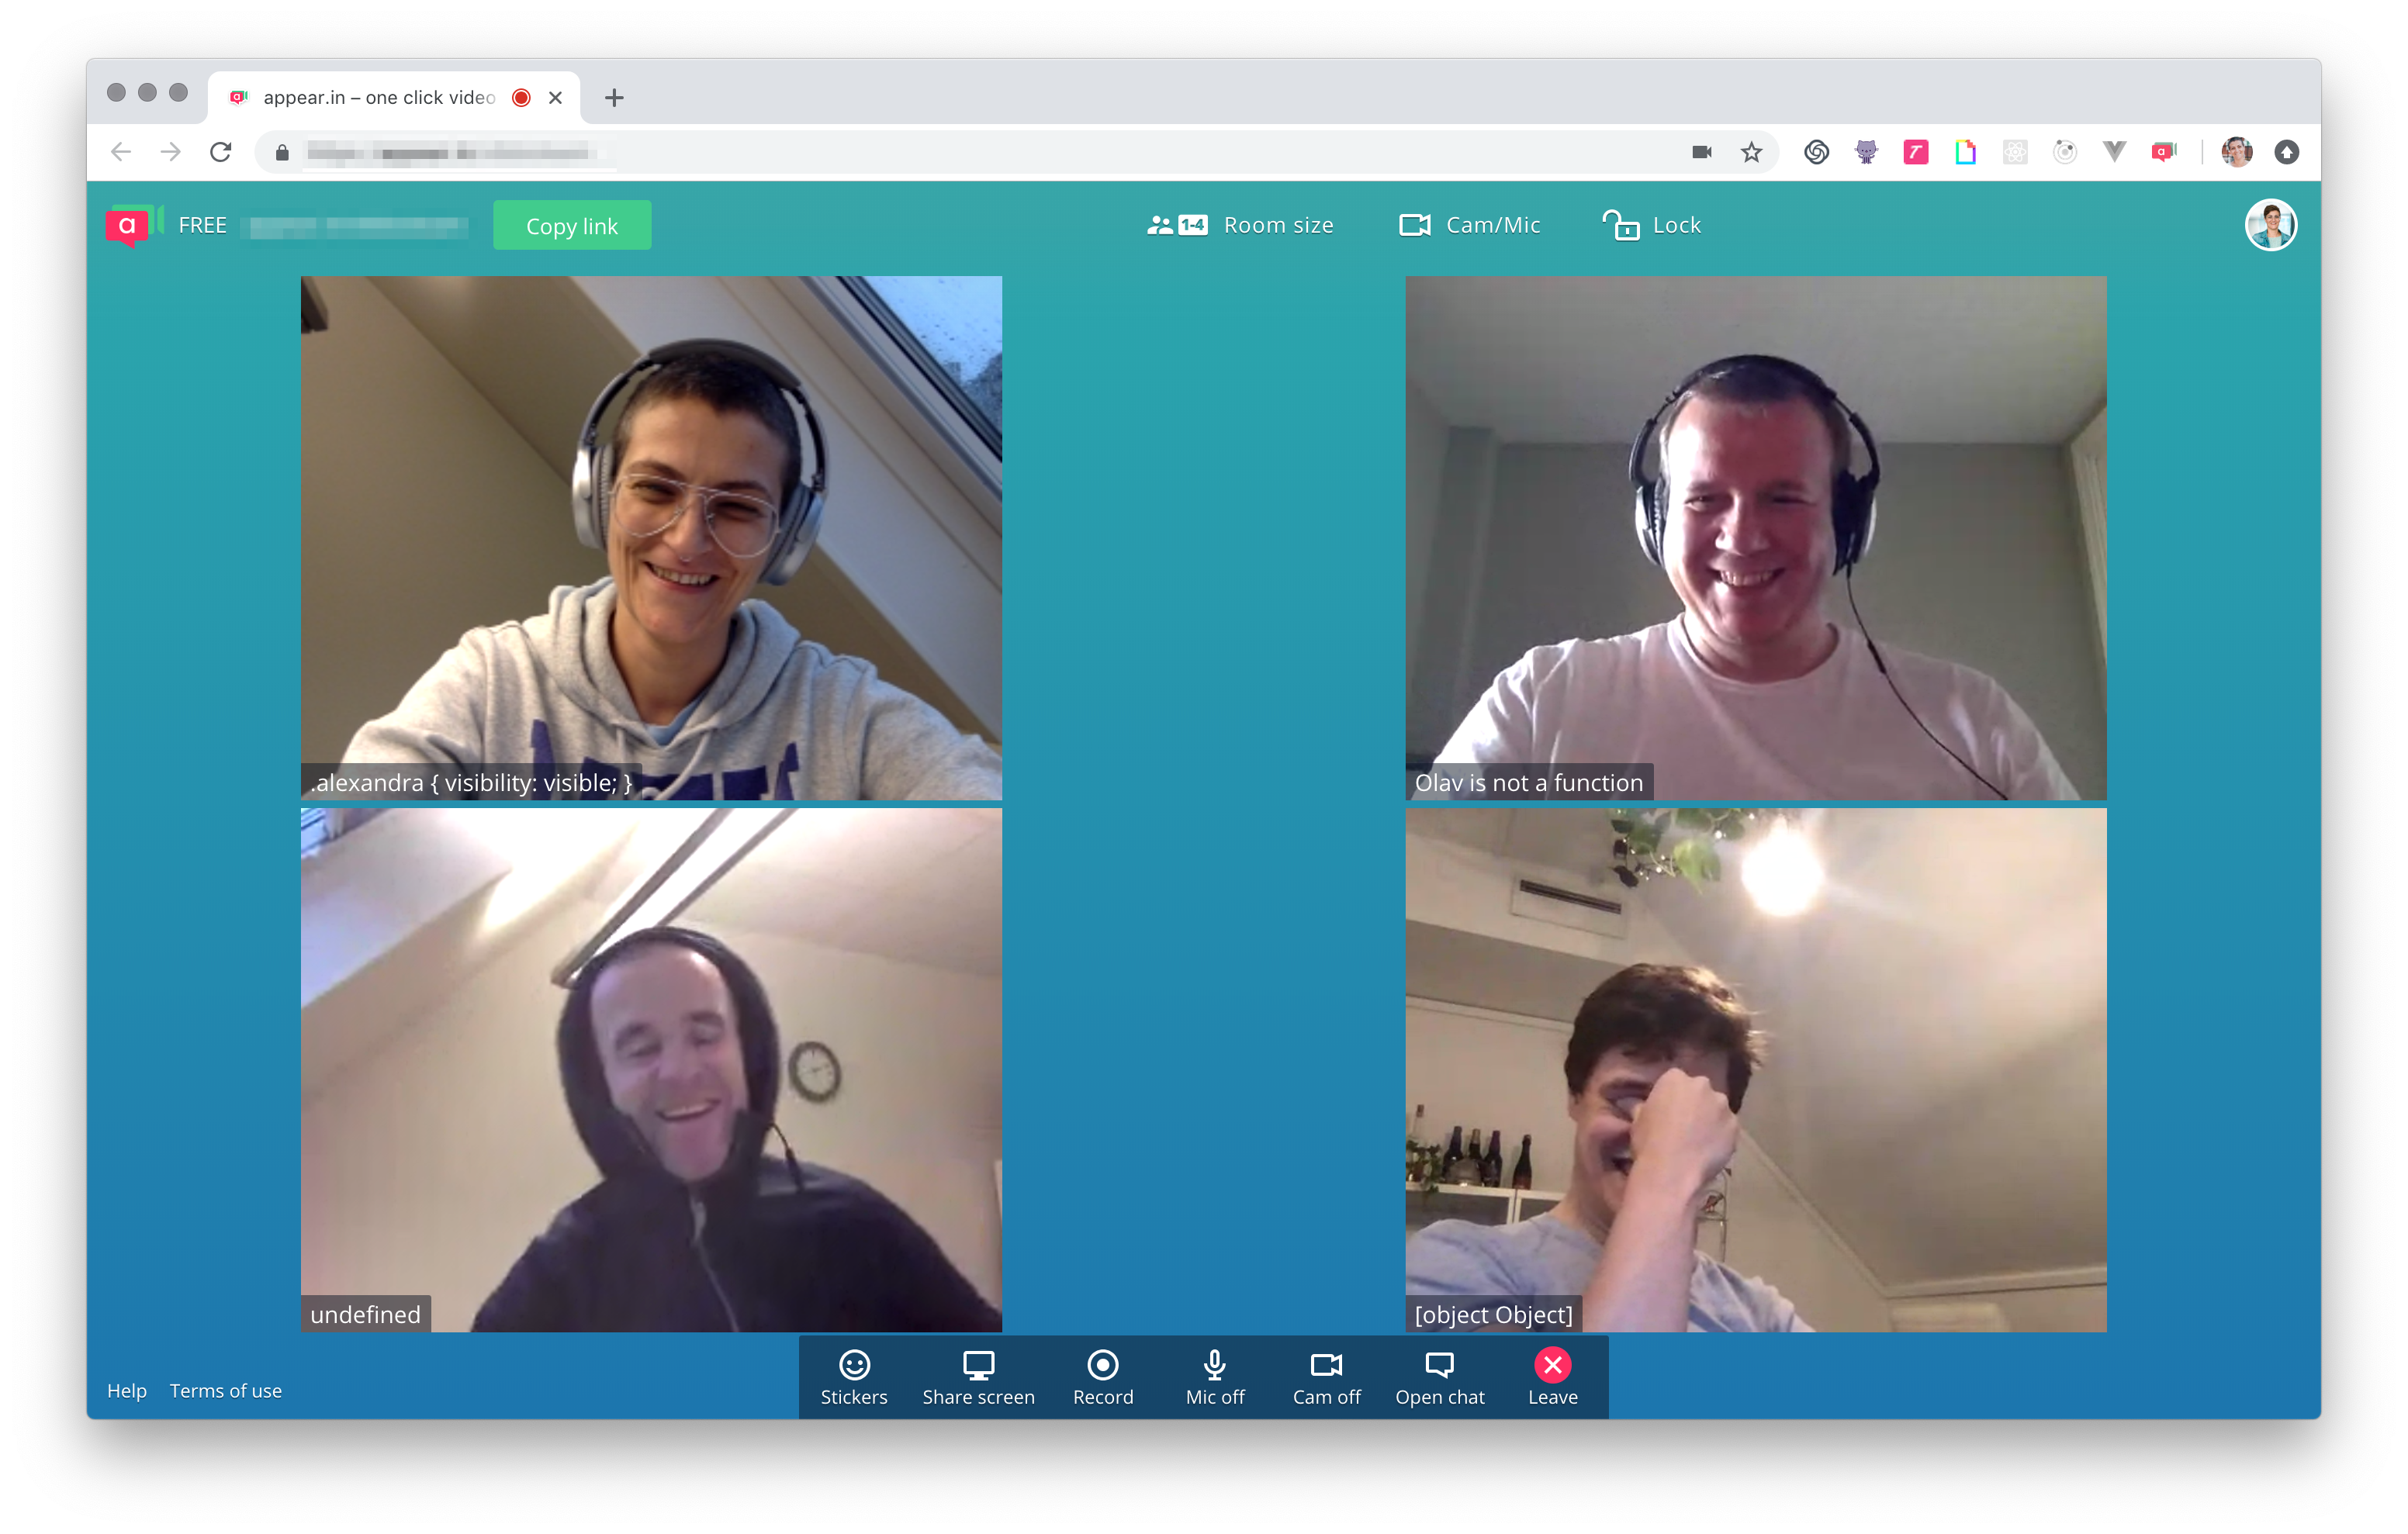 The VIBBIO product team being silly during our Friday afternoon video call (from top left to bottom right: me, Olav, Espen, and Jon)